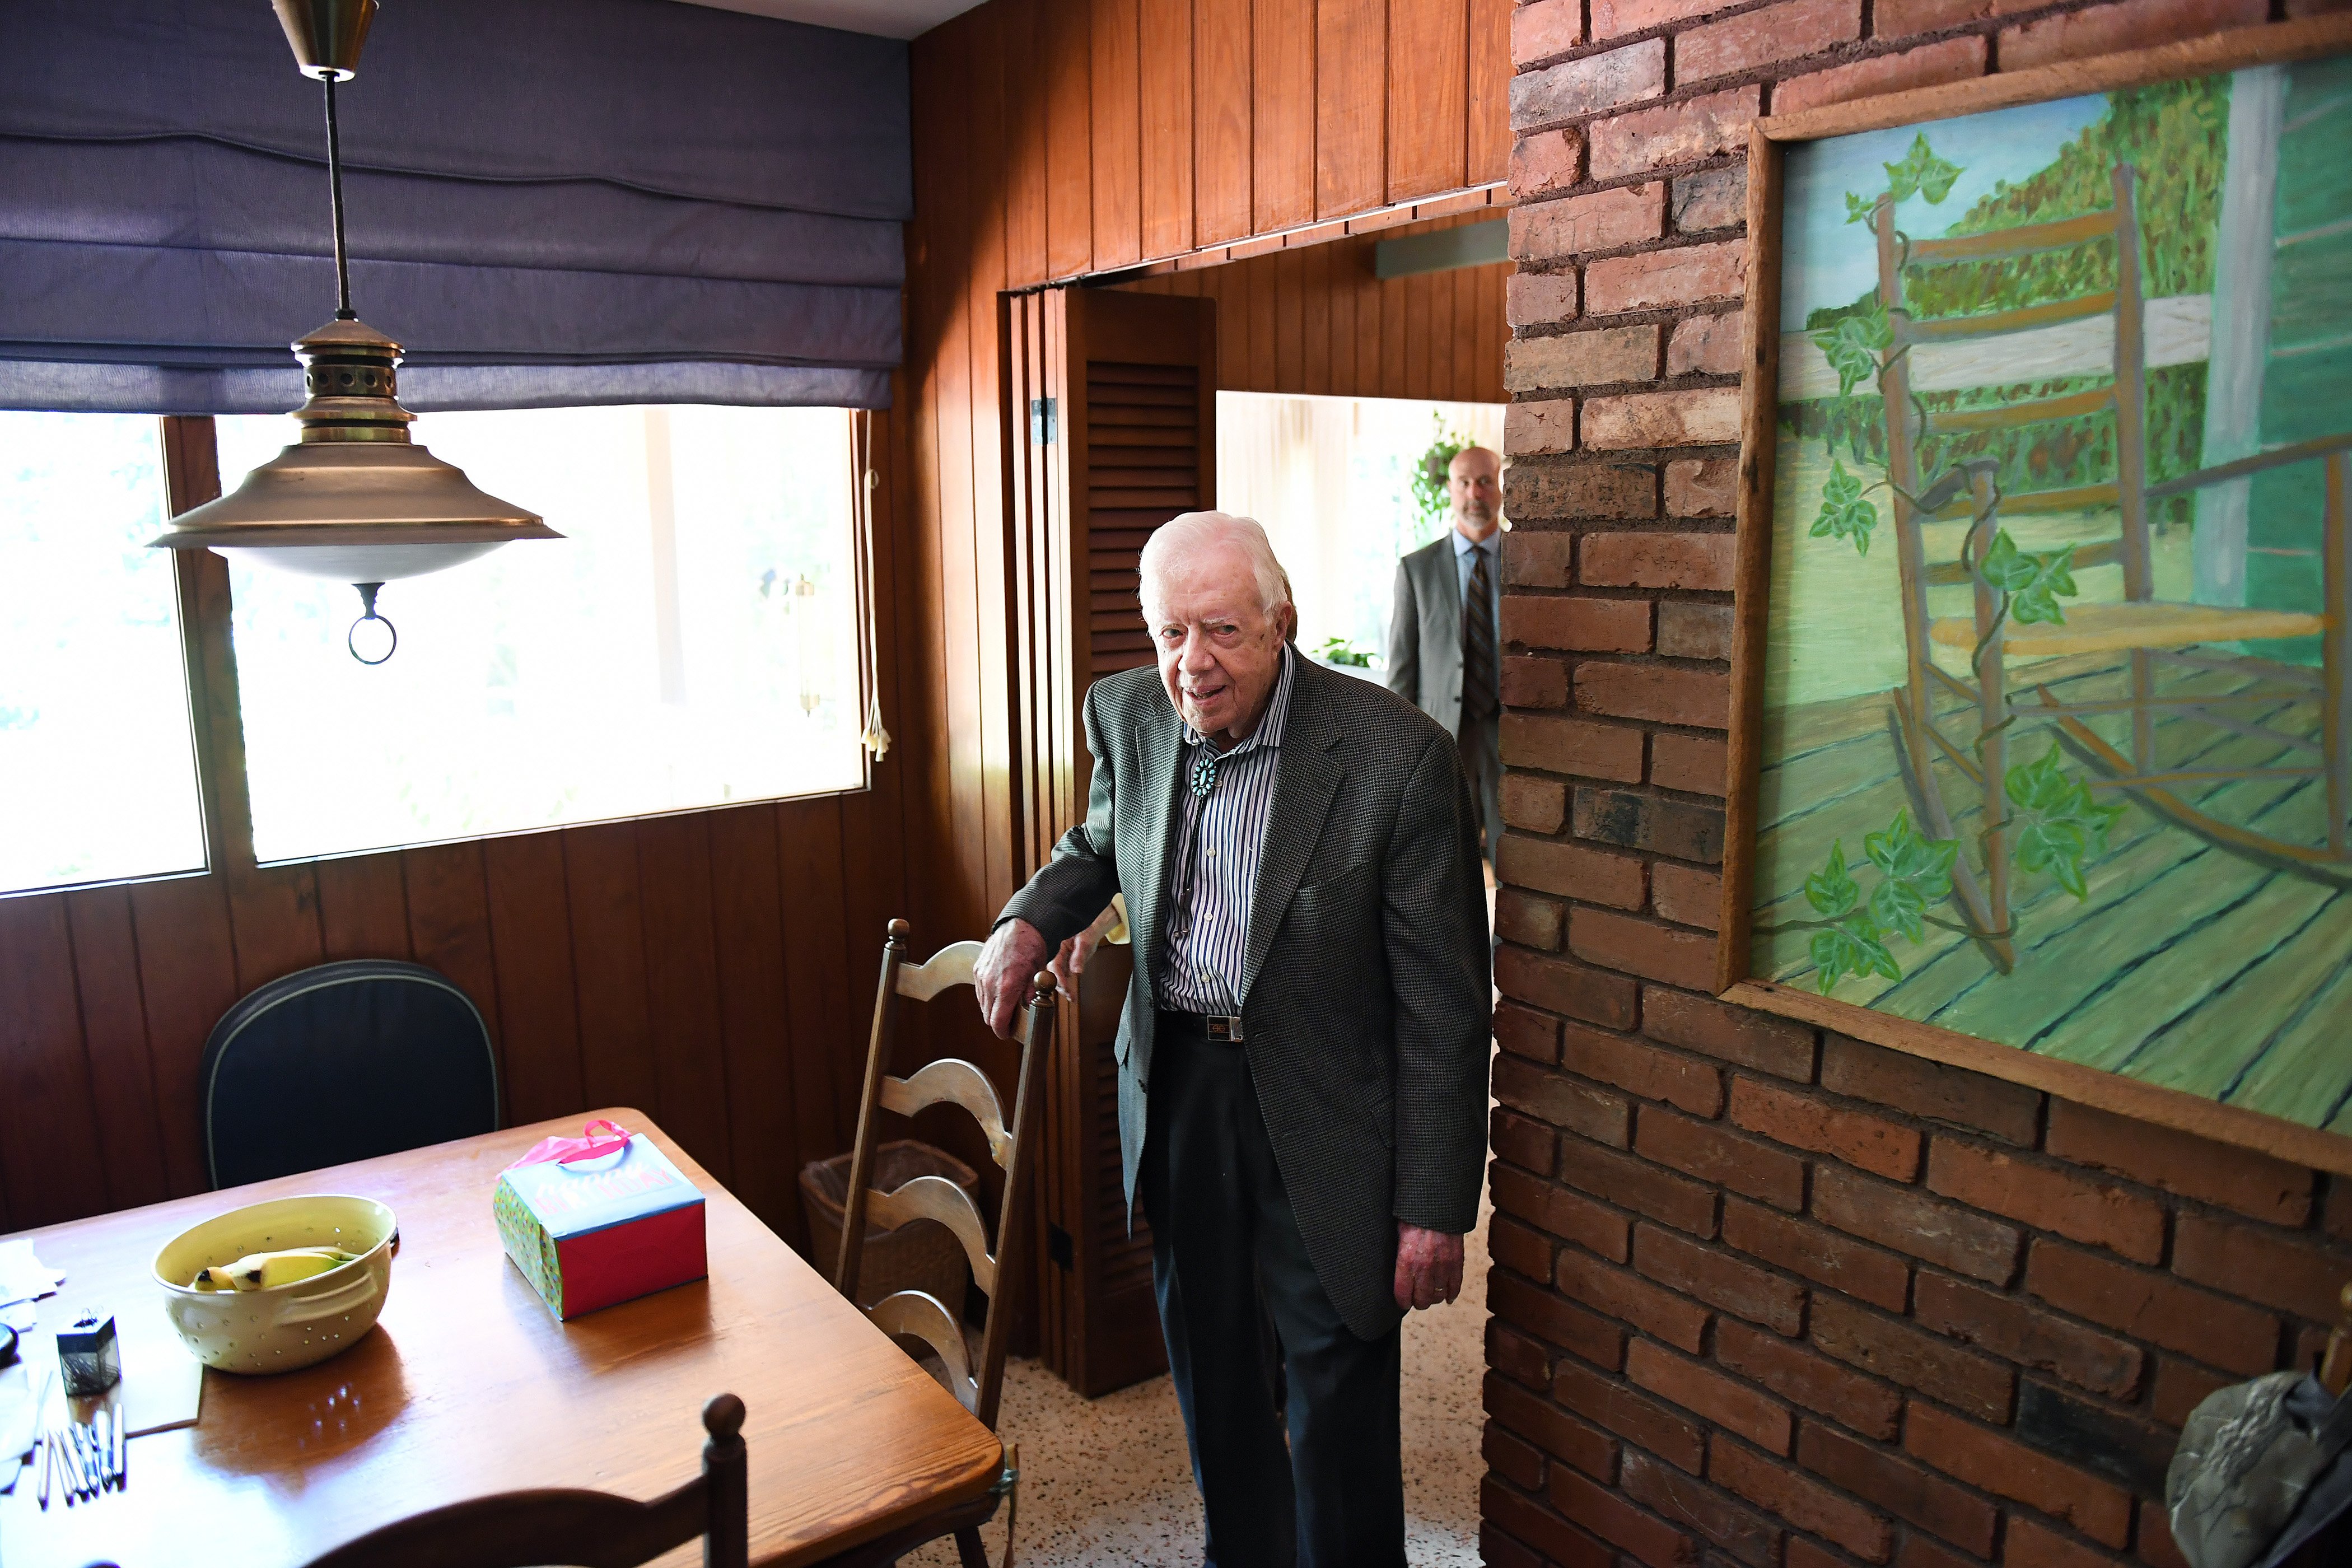 Former President of the United States Jimmy Carter at his home after a morning church service at Maranatha Baptist Church on August 5, 2018, in Plains, Georgia | Source: Getty Images